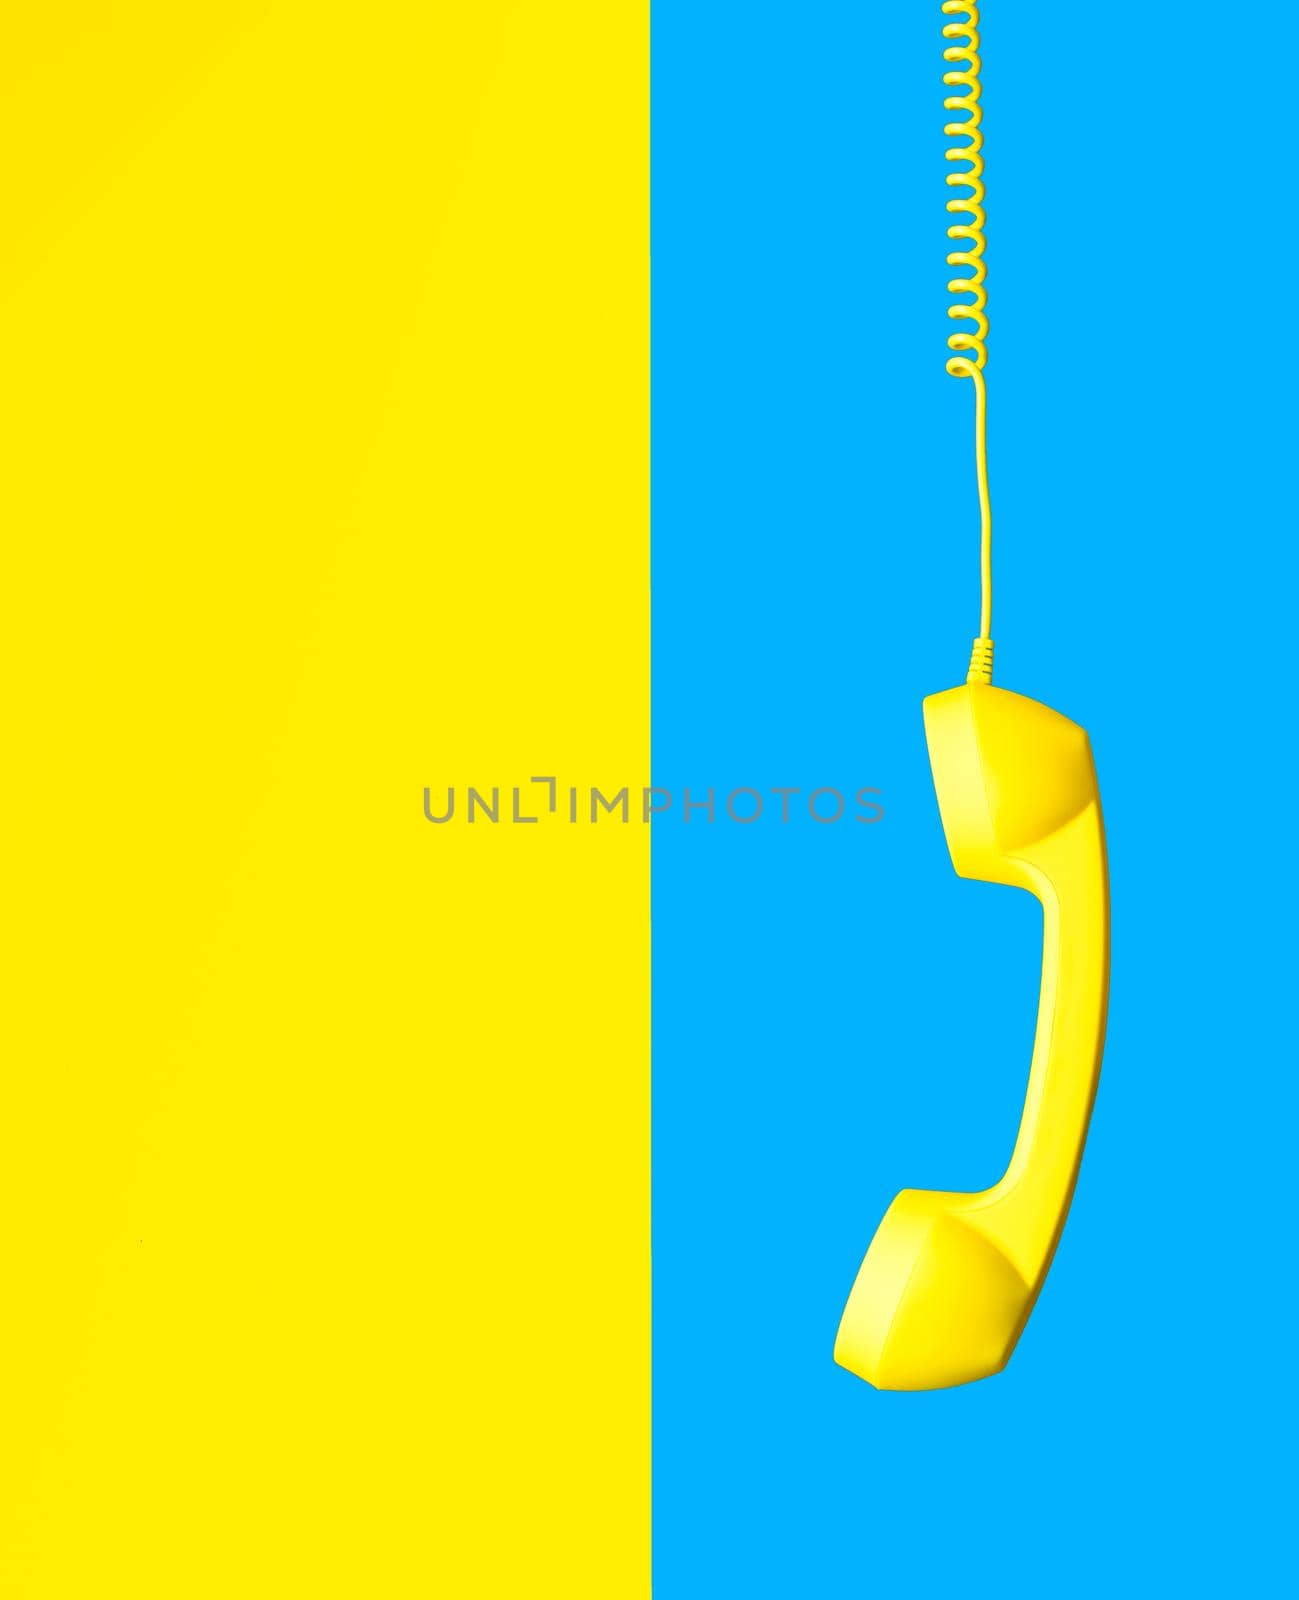 yellow retro phone hanging on spiral cord on background split in half in sky blue and yellow